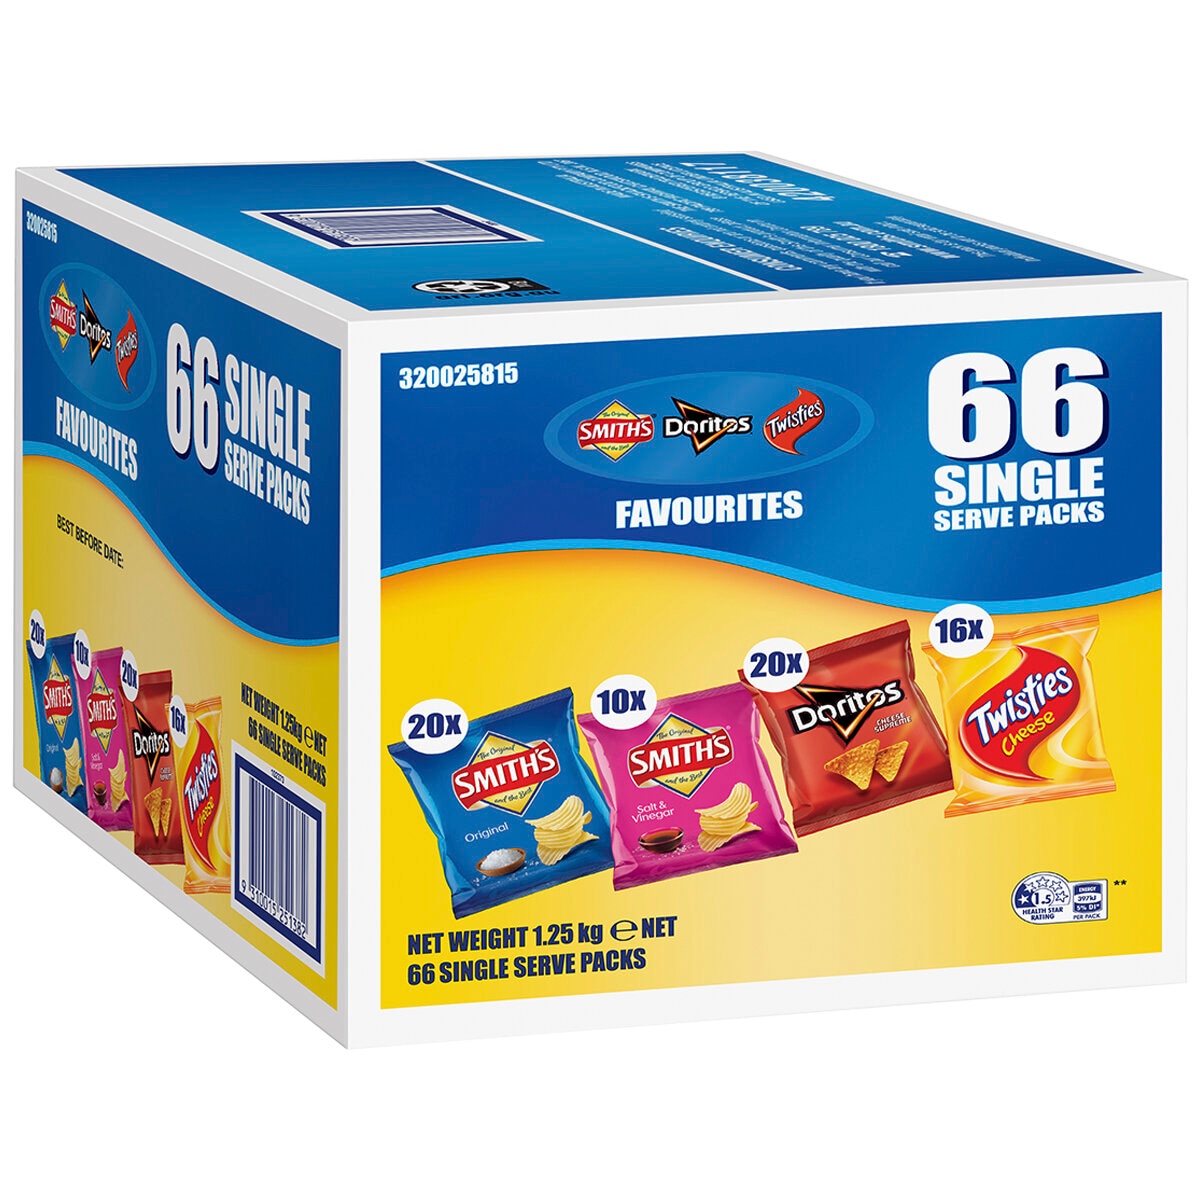 Smith's Variety Favourites 66 packs